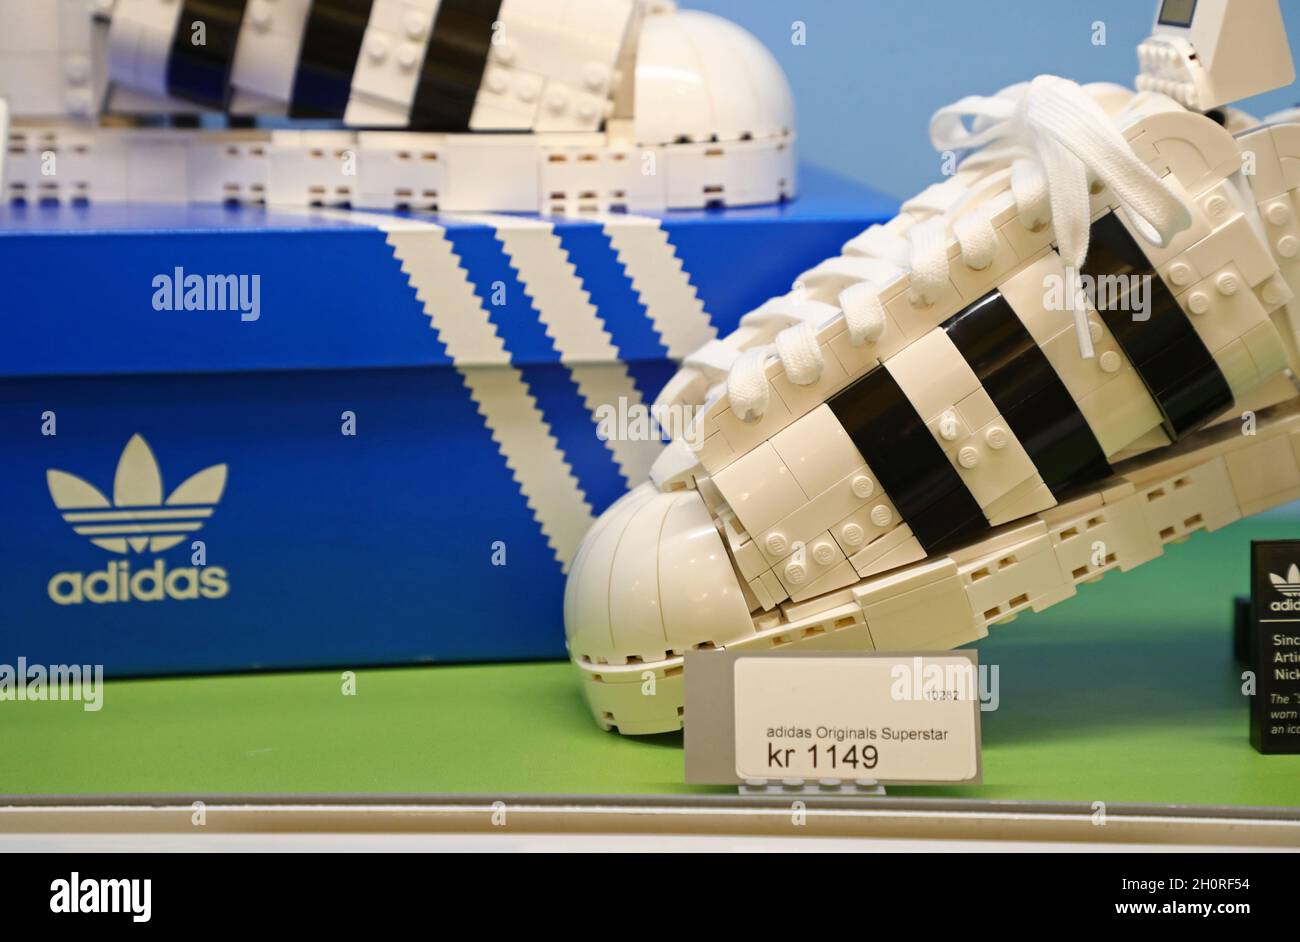 Adidas Originals Superstar lego in a LEGO Store, Westfield Mall Scandinavia in Solna, Sweden, during Sunday afternoon Stock Photo - Alamy